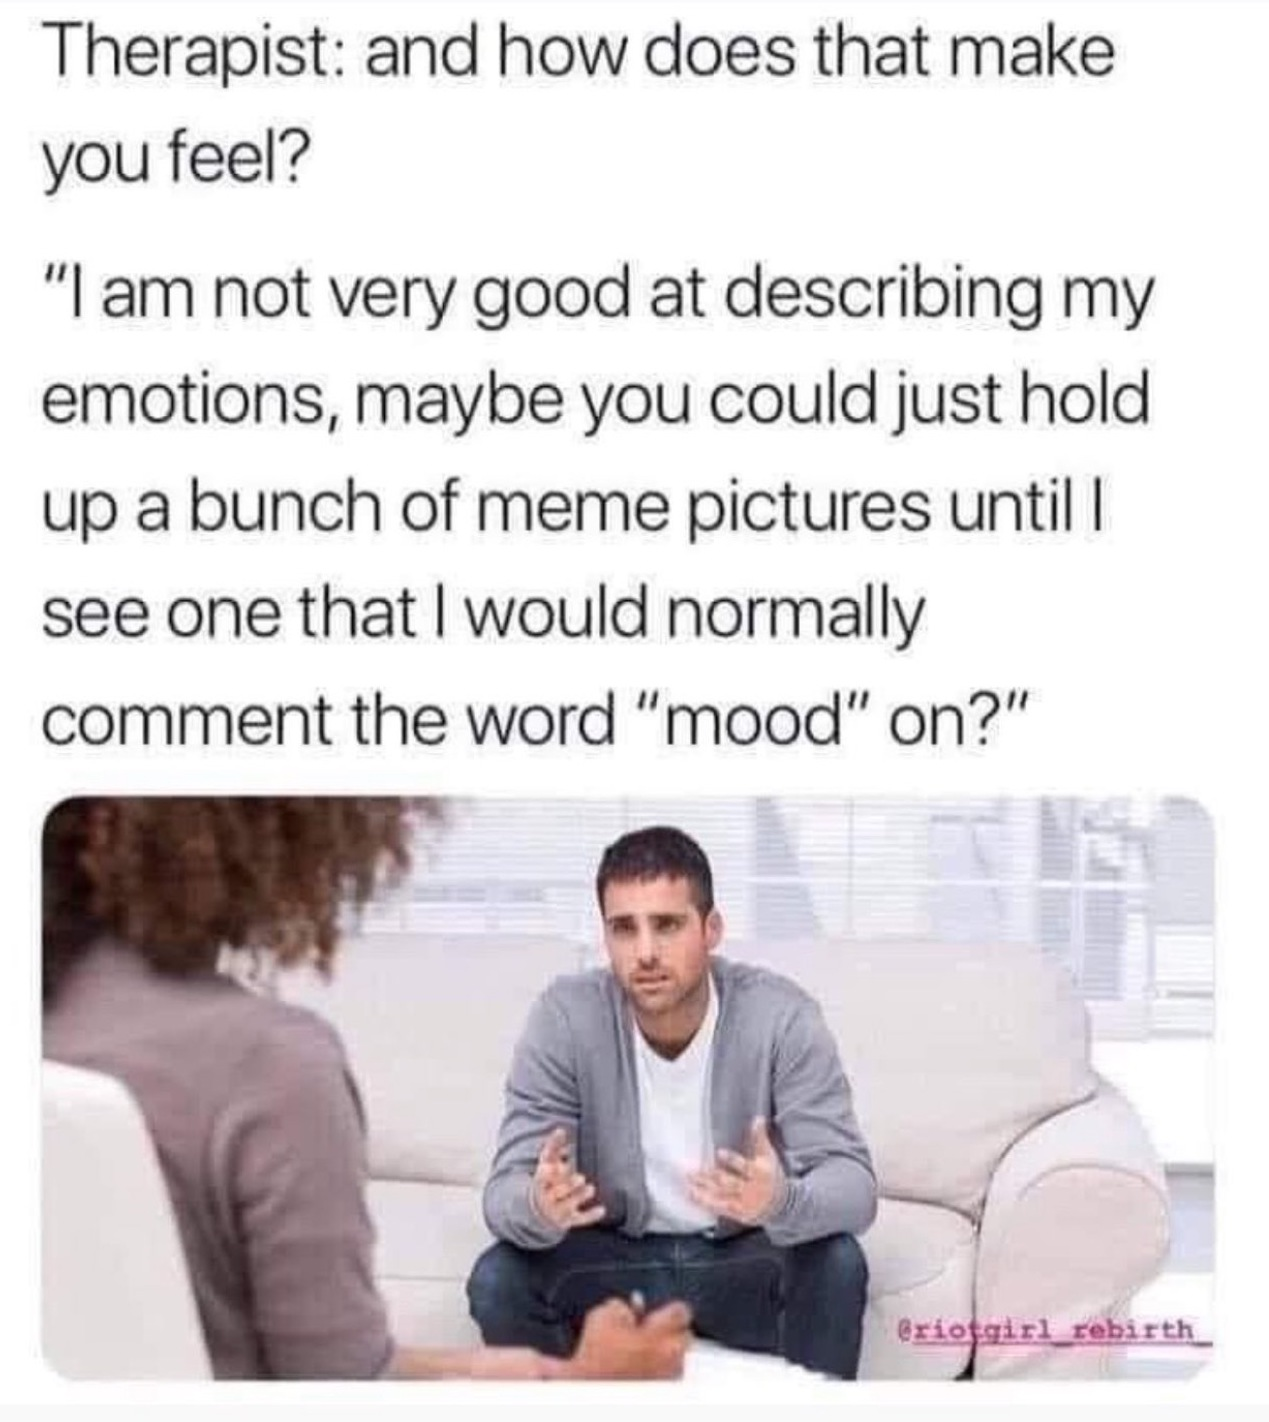 therapy memes - Therapist and how does that make you feel? "I am not very good at describing my emotions, maybe you could just hold up a bunch of meme pictures until I see one that I would normally comment the word "mood" on?" Griosgirl rebirth